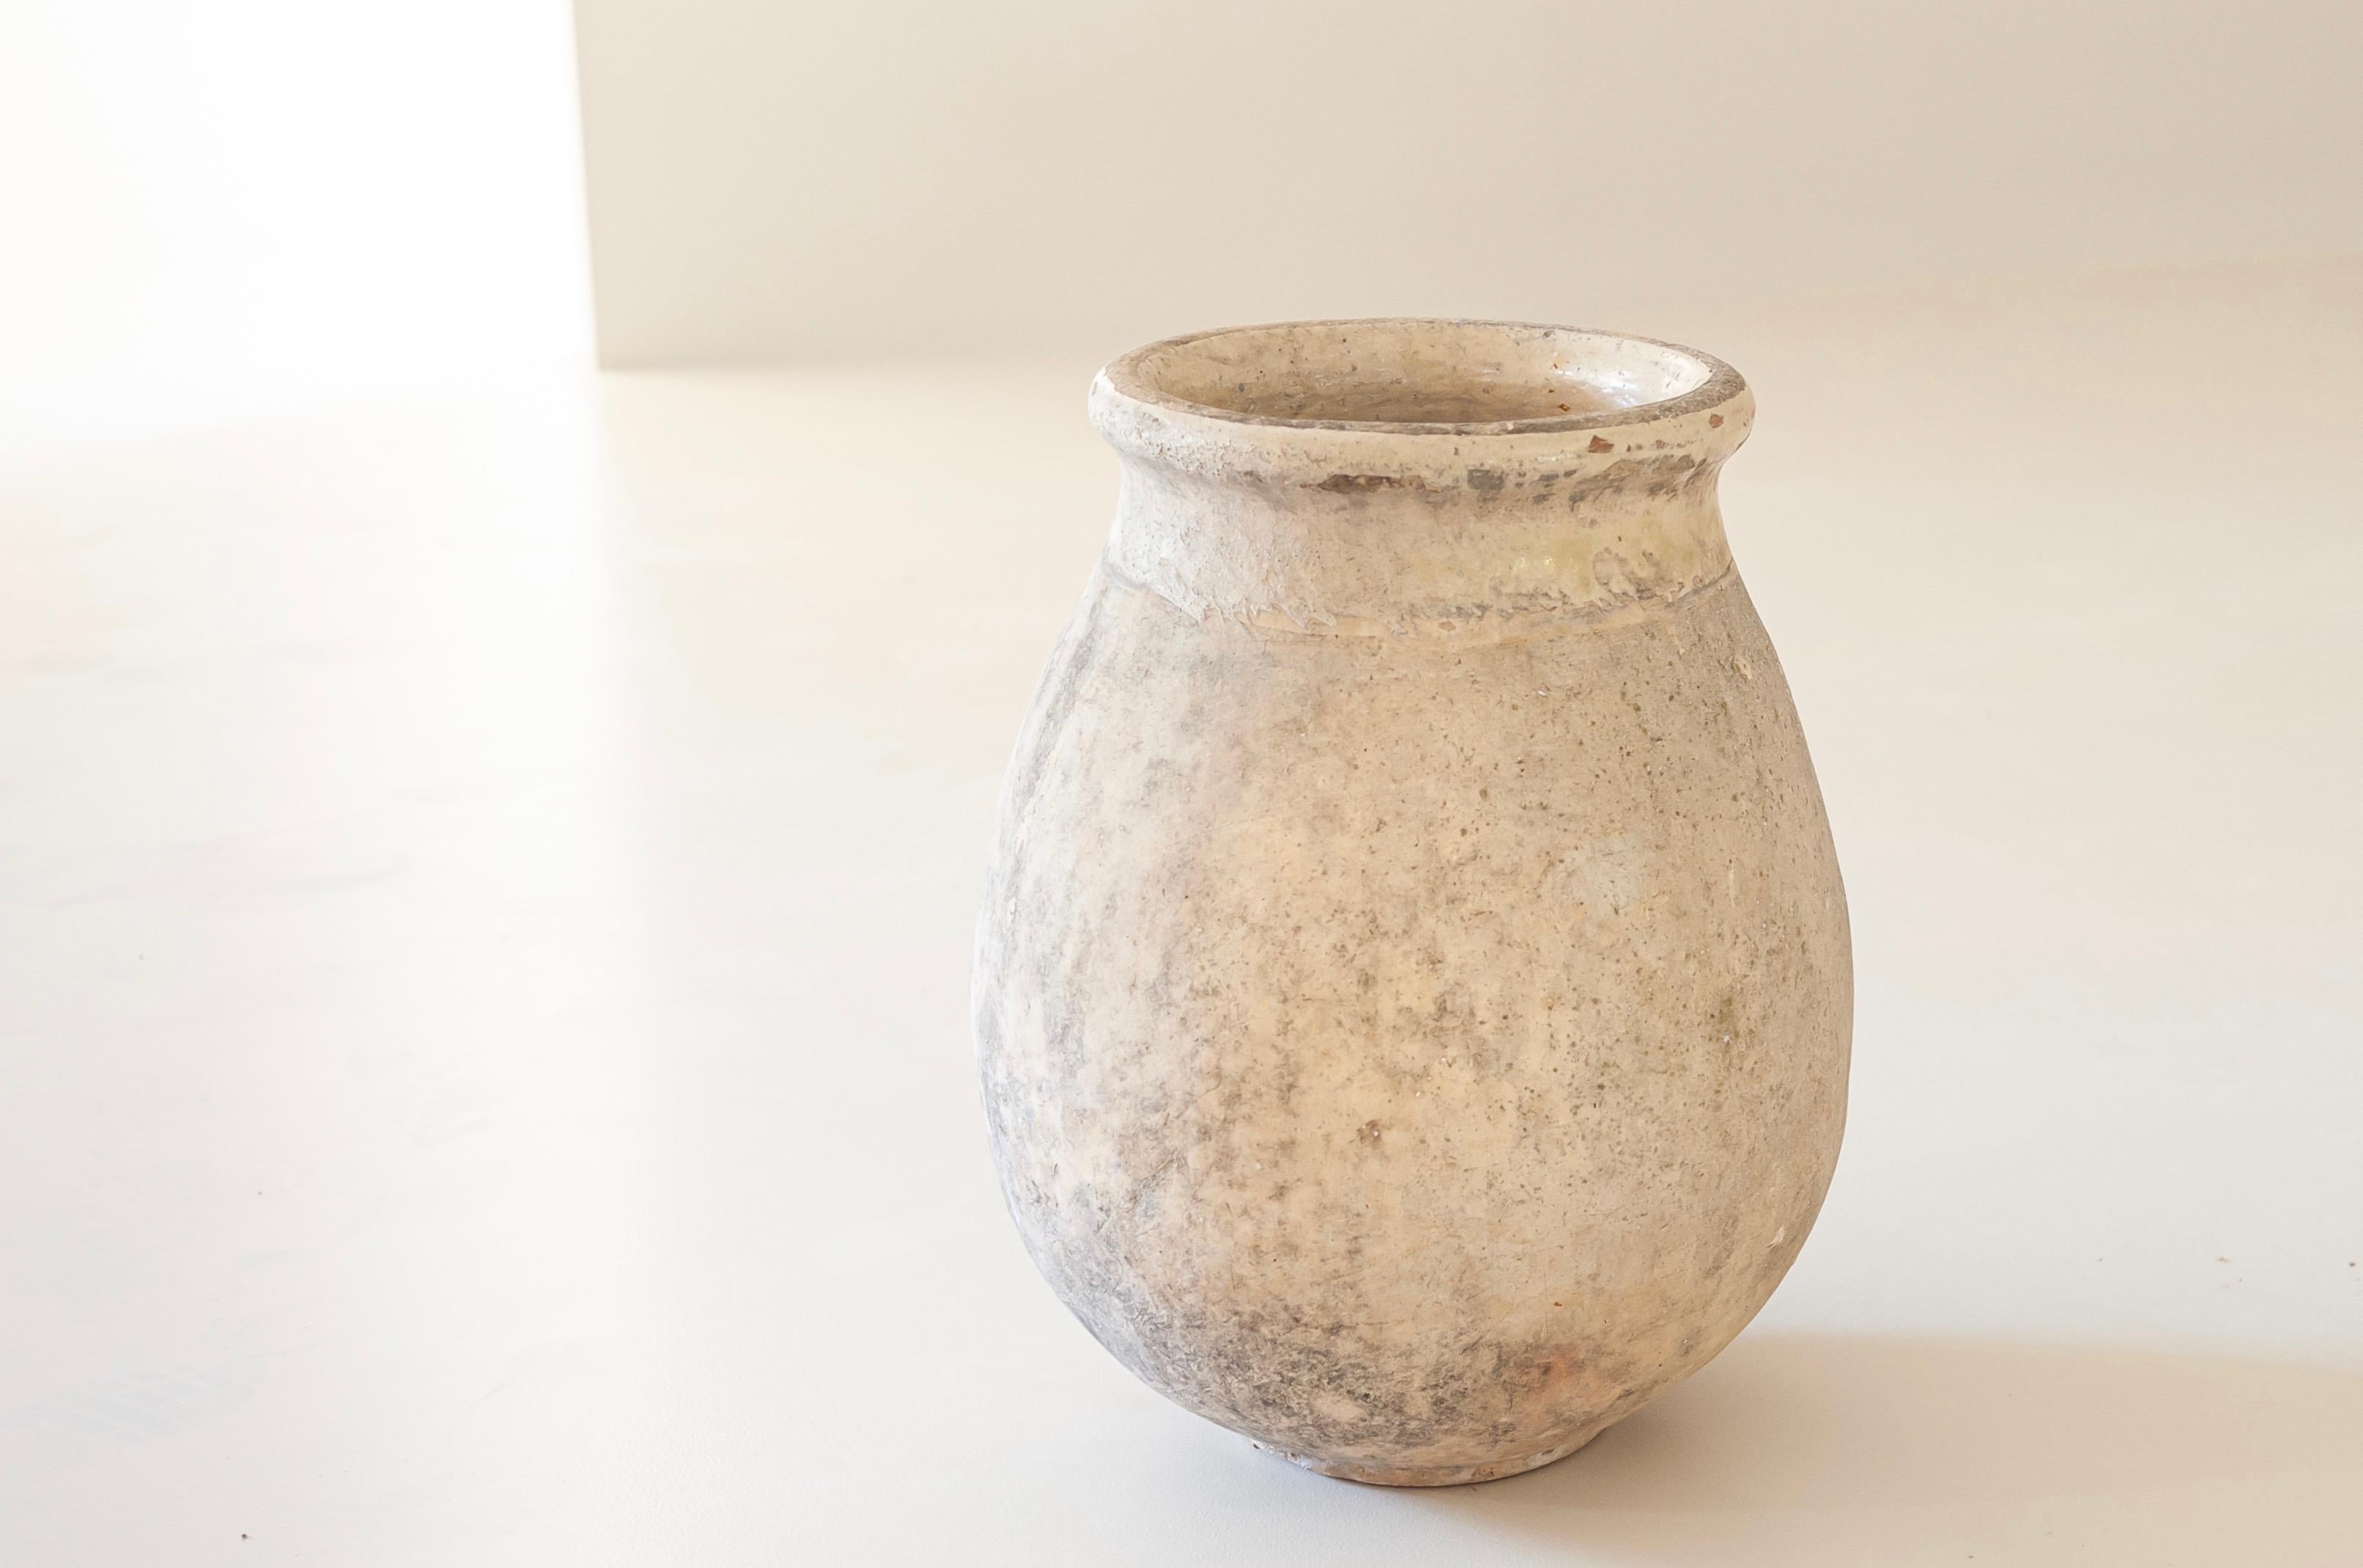 Beautiful original 19th century Ligurian olive jar with a charming aged patina and perfect proportions and measures for both an indoor and outdoor use.

Handcrafted using white soil and the ancient technique of rope thrown pottery, with an elegant